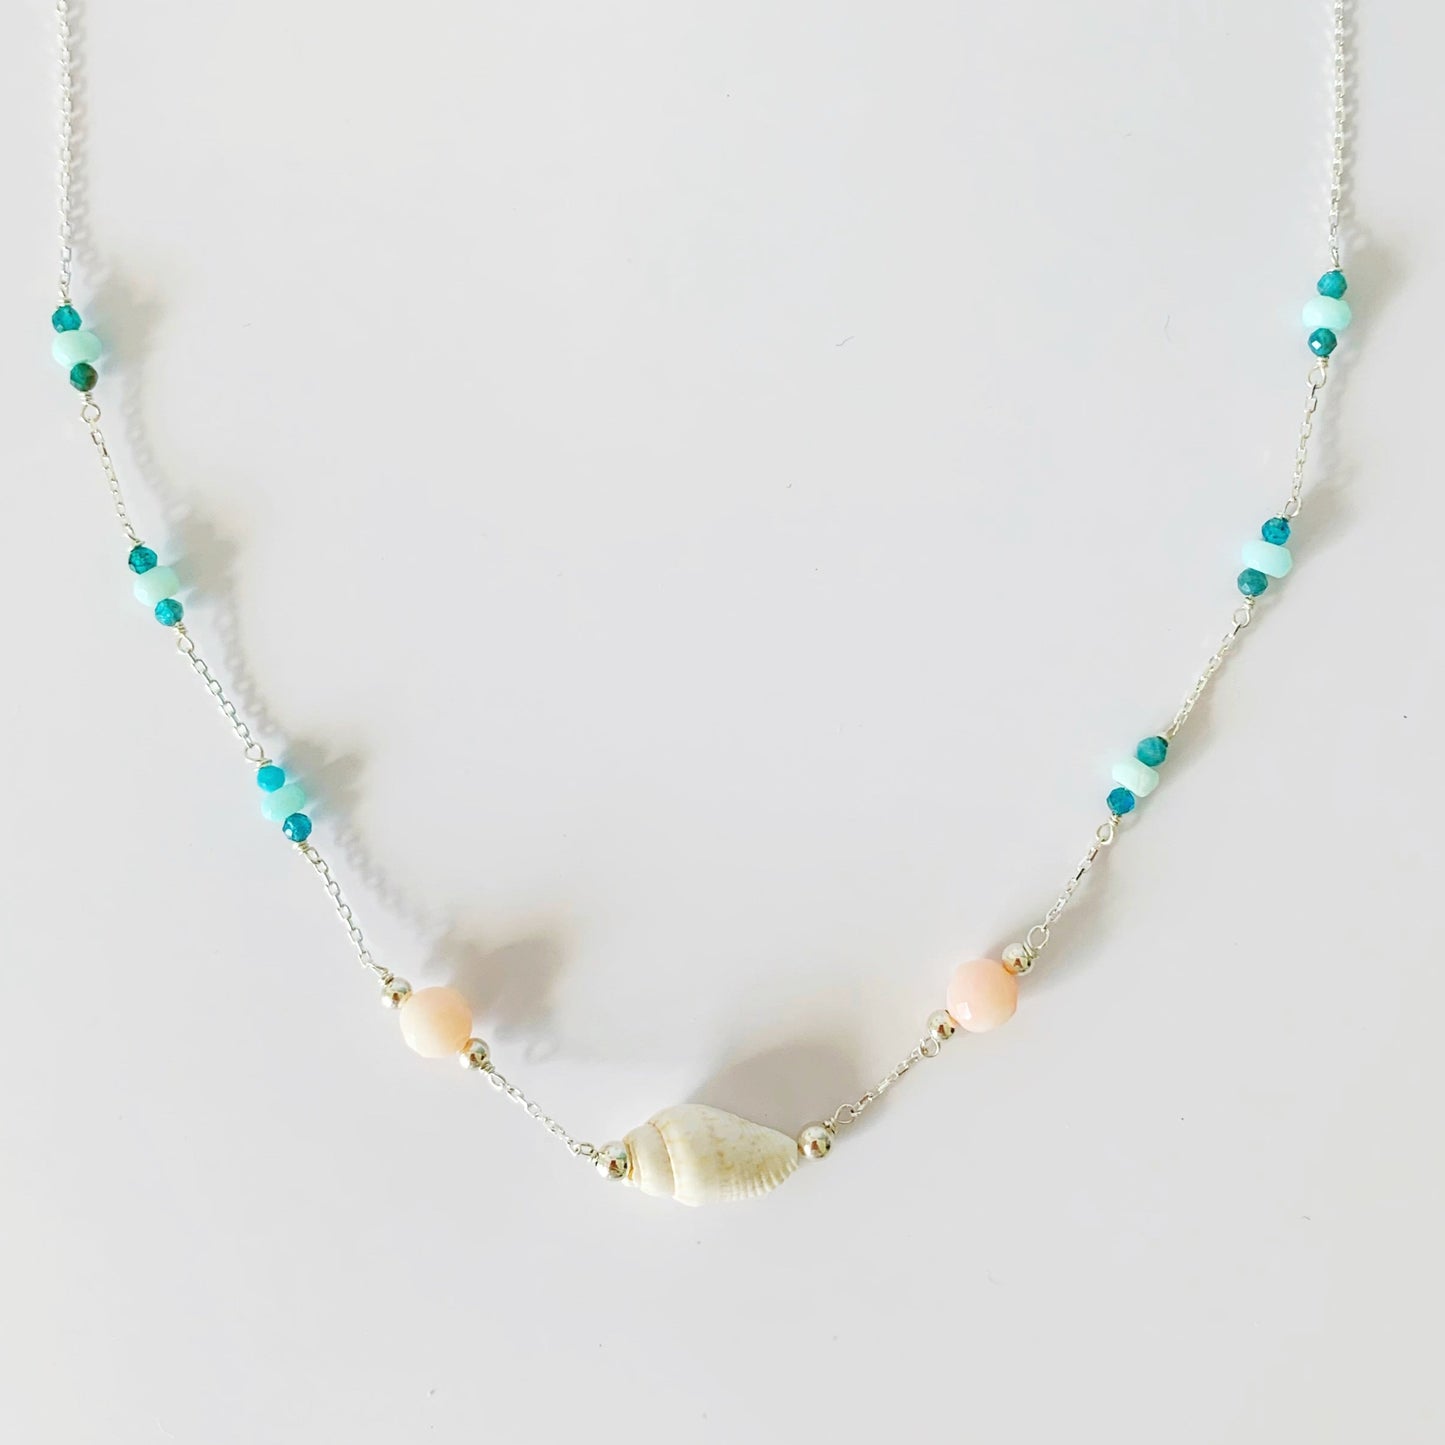 the pool party shellebration necklace by mermaids and madeleines is  station style necklace with a shell and coral beads at the center and little sections of Peruvian opal and apatite throughout the sterling chain to the clasp. this necklace is photographed on a white surface